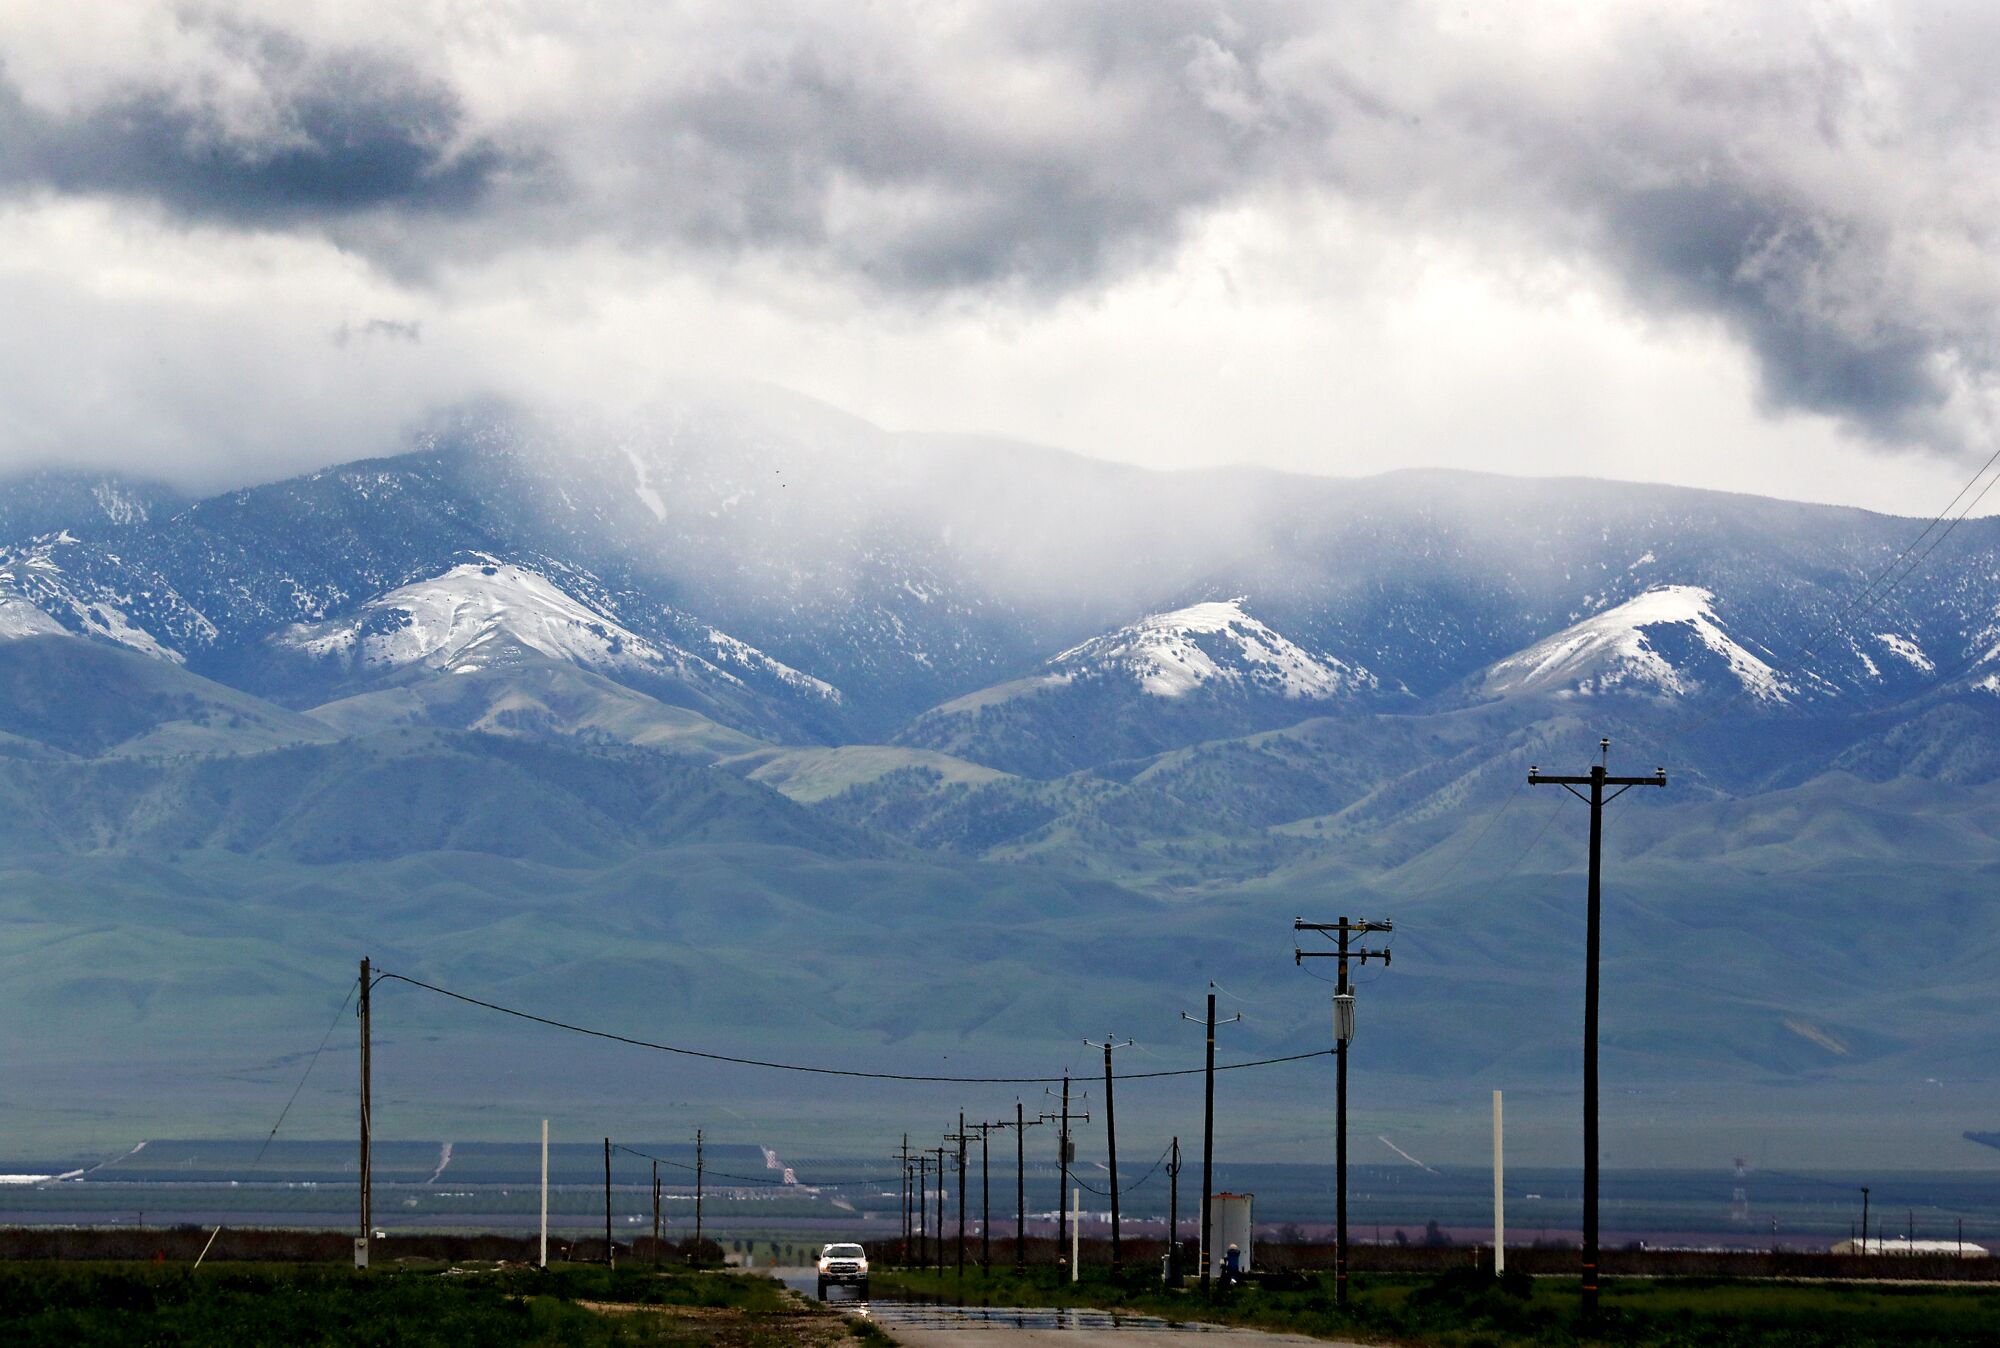 Storm clouds leave a dusting of snow on the mountains at the edge of the vast and fertile San Joaquin Valley. 